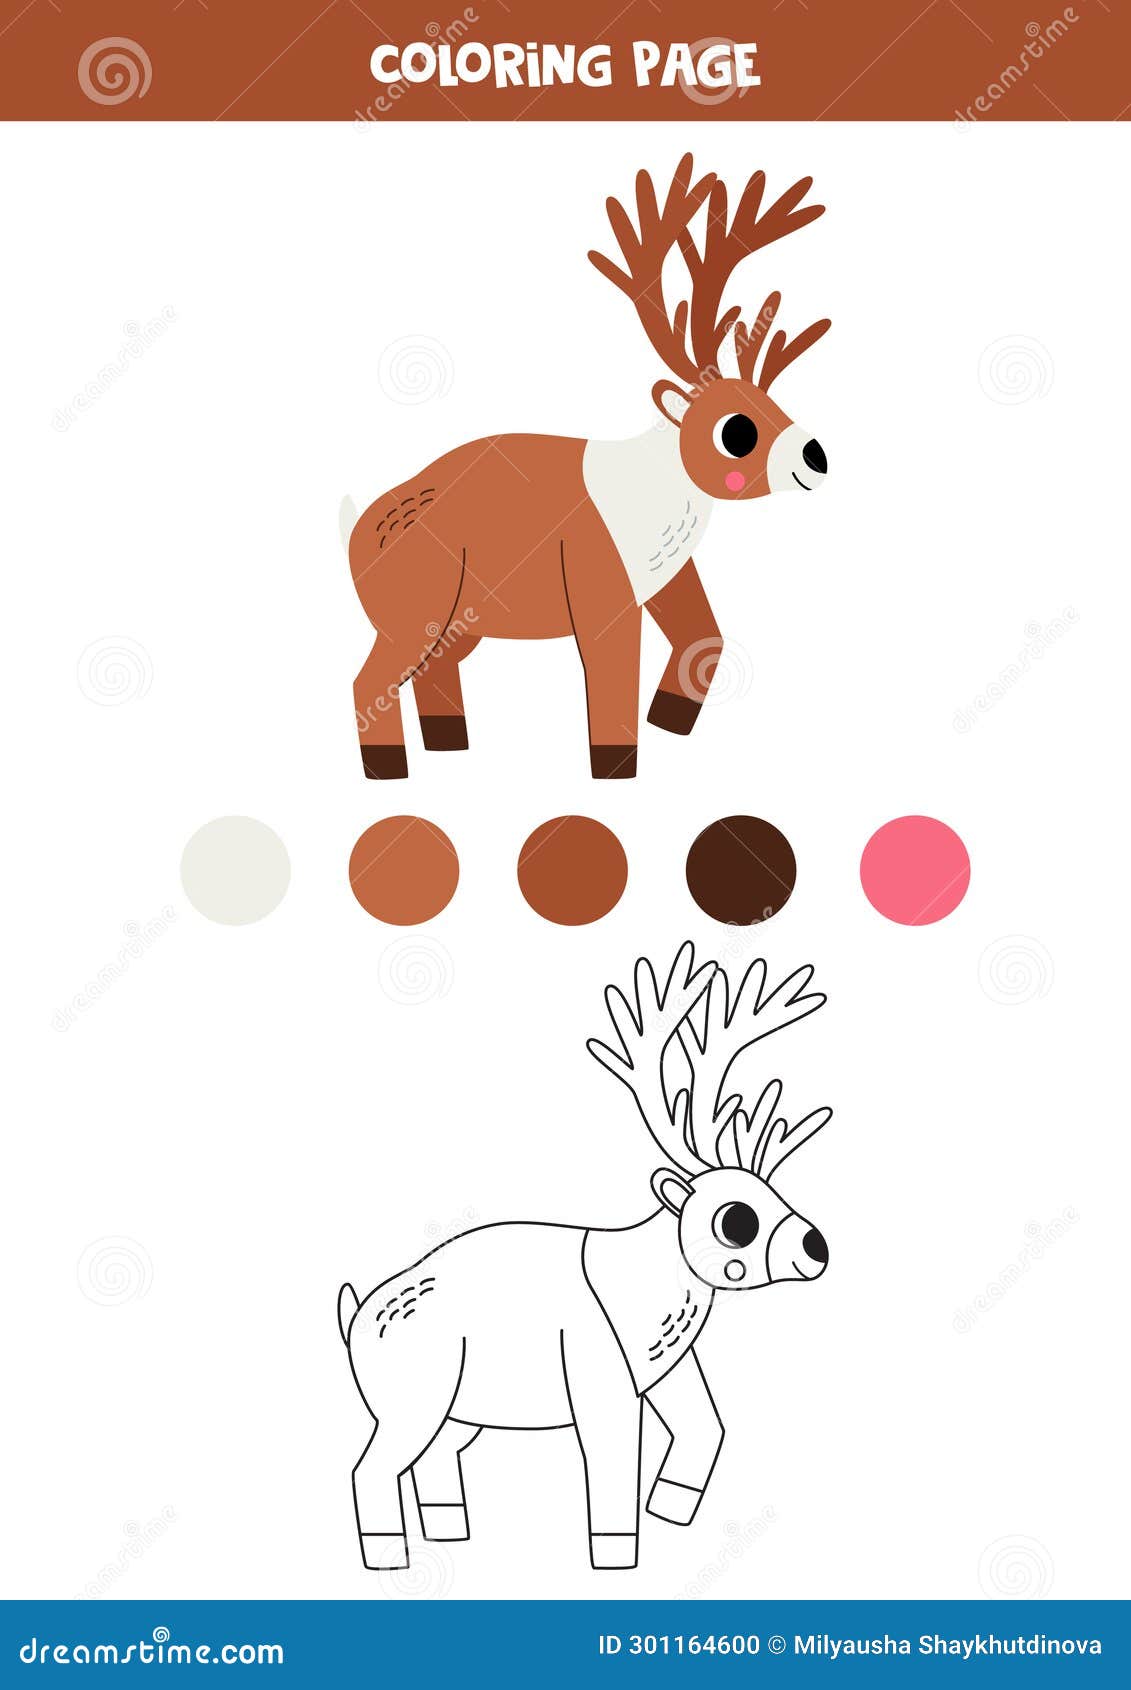 Caribou coloring page stock illustrations â caribou coloring page stock illustrations vectors clipart